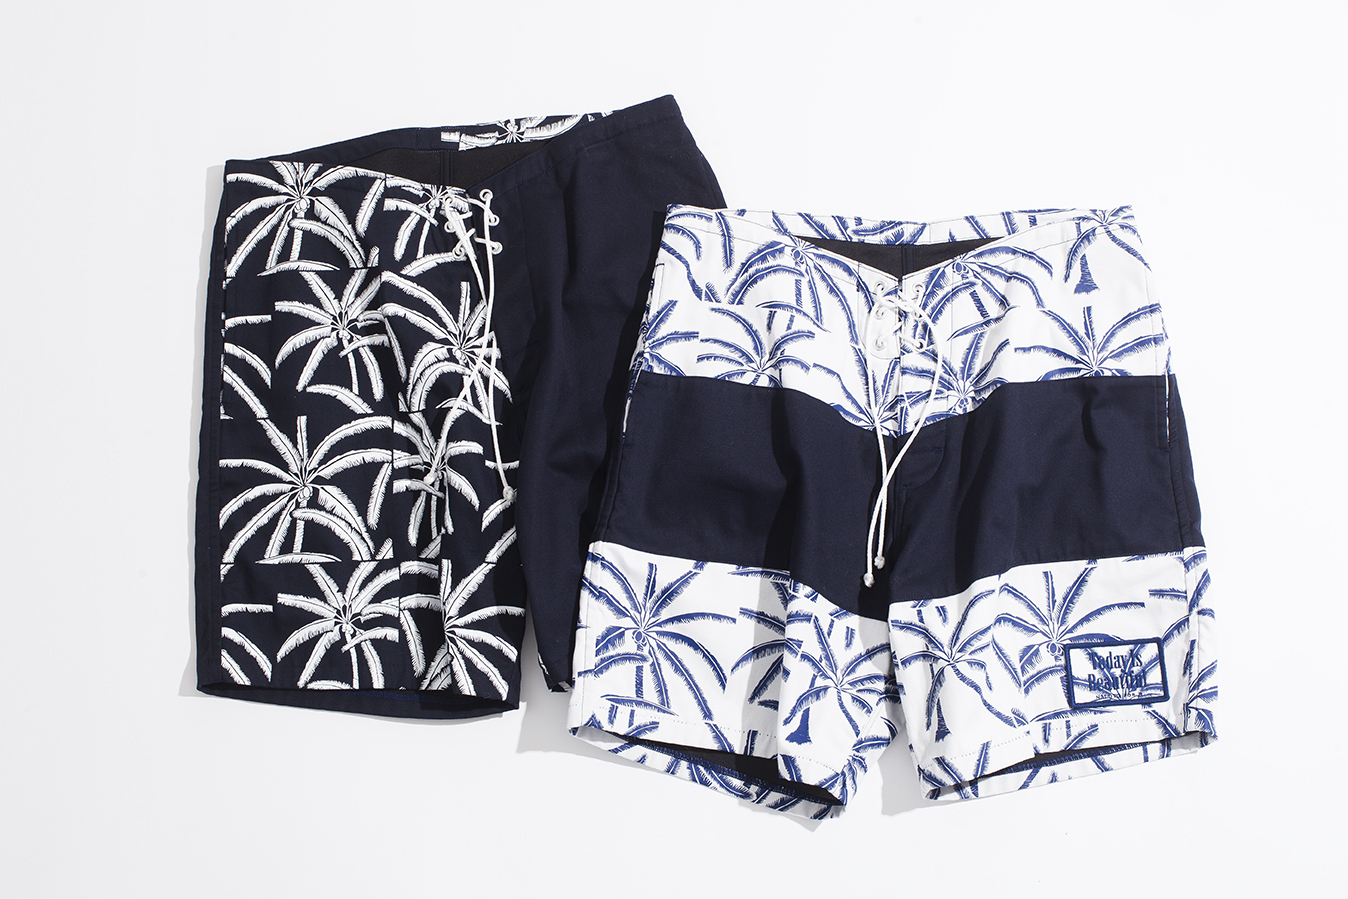 NALUTO TRUNKS×FOREST CLOUD for RHC
PALM TREE TRUNKS